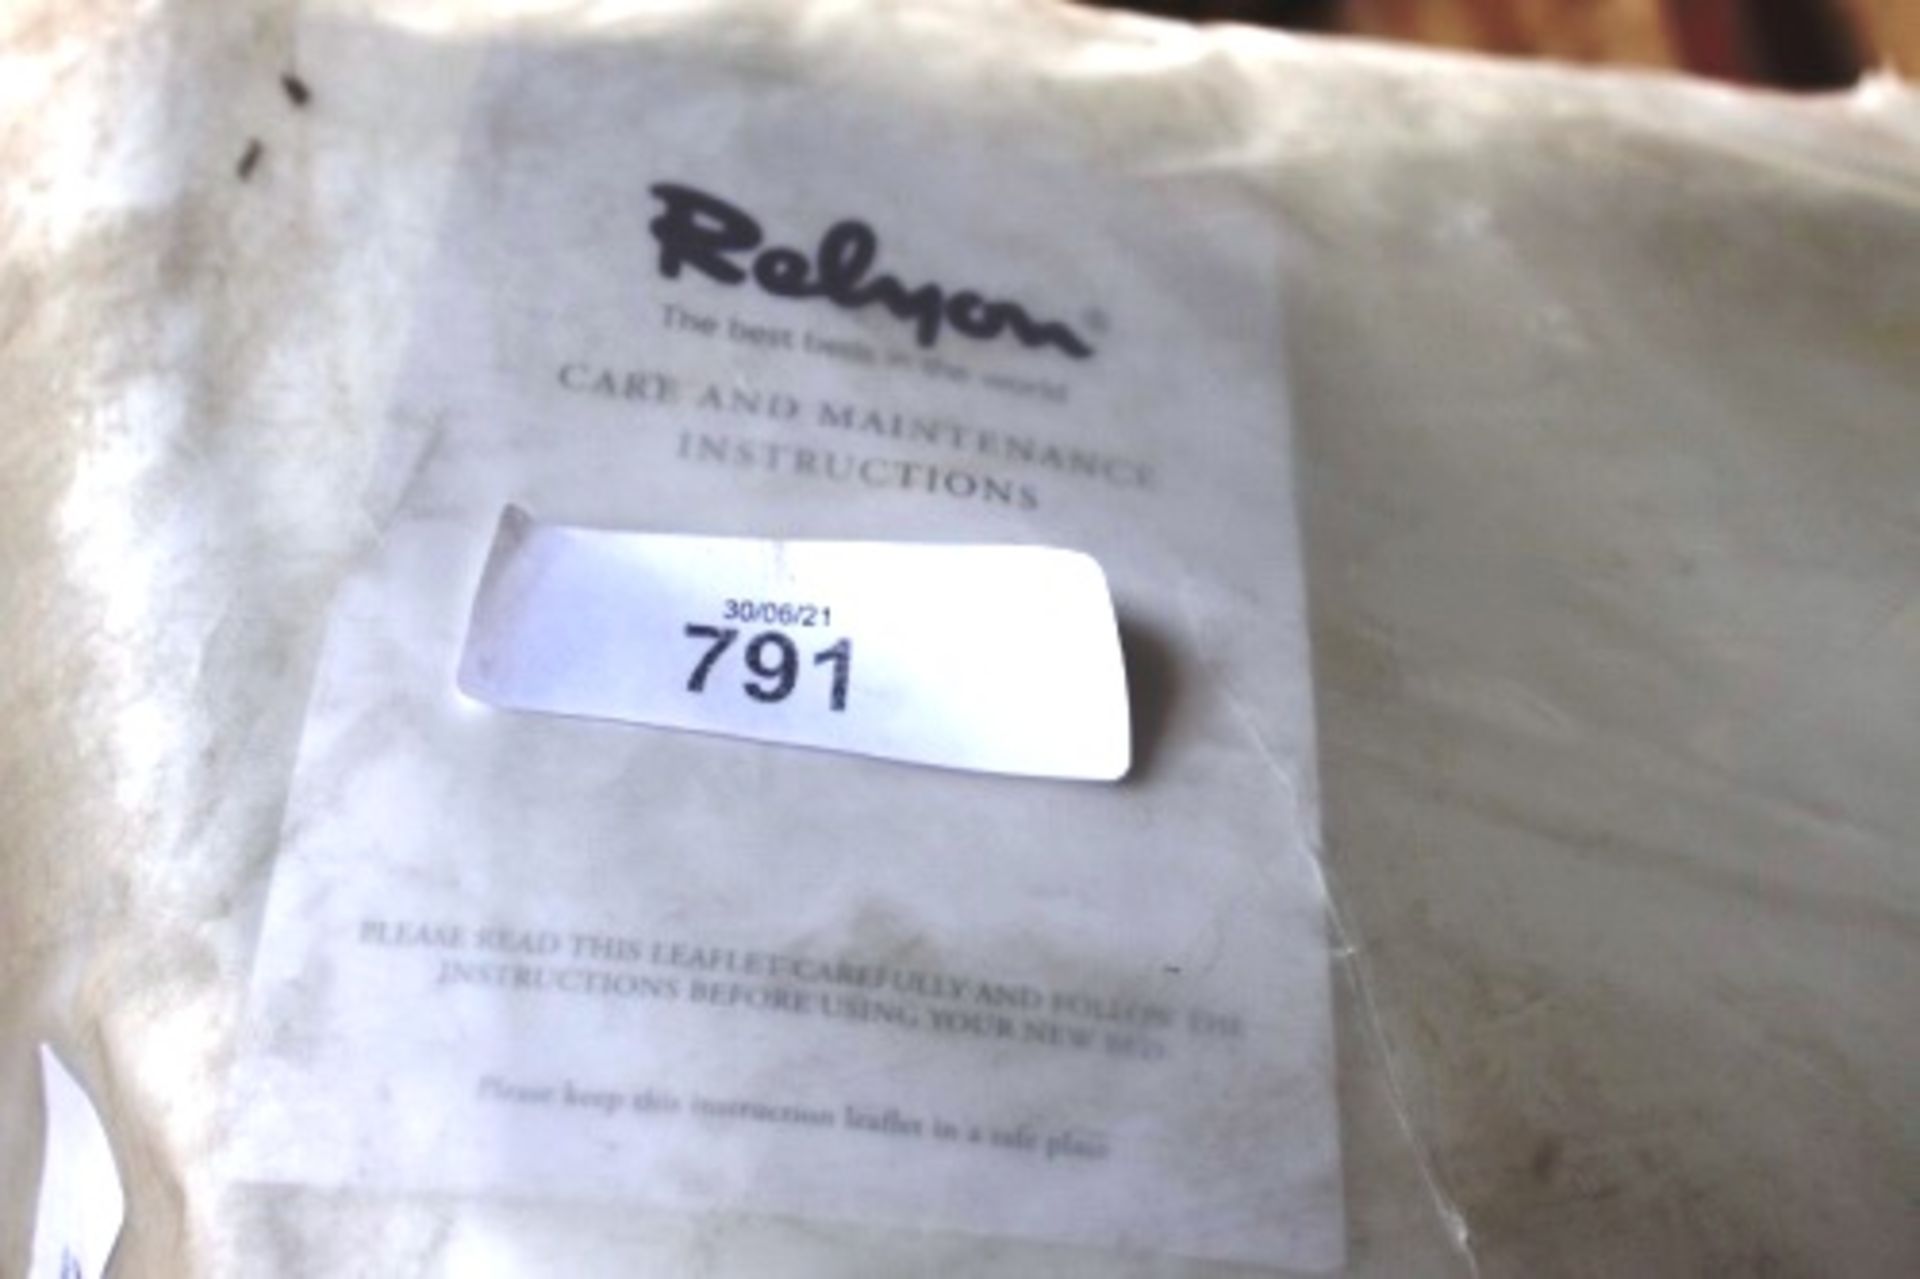 1 x Reylon Balmoral soft mattress, size 4'6" - new with some marks due to poor store (top shed)